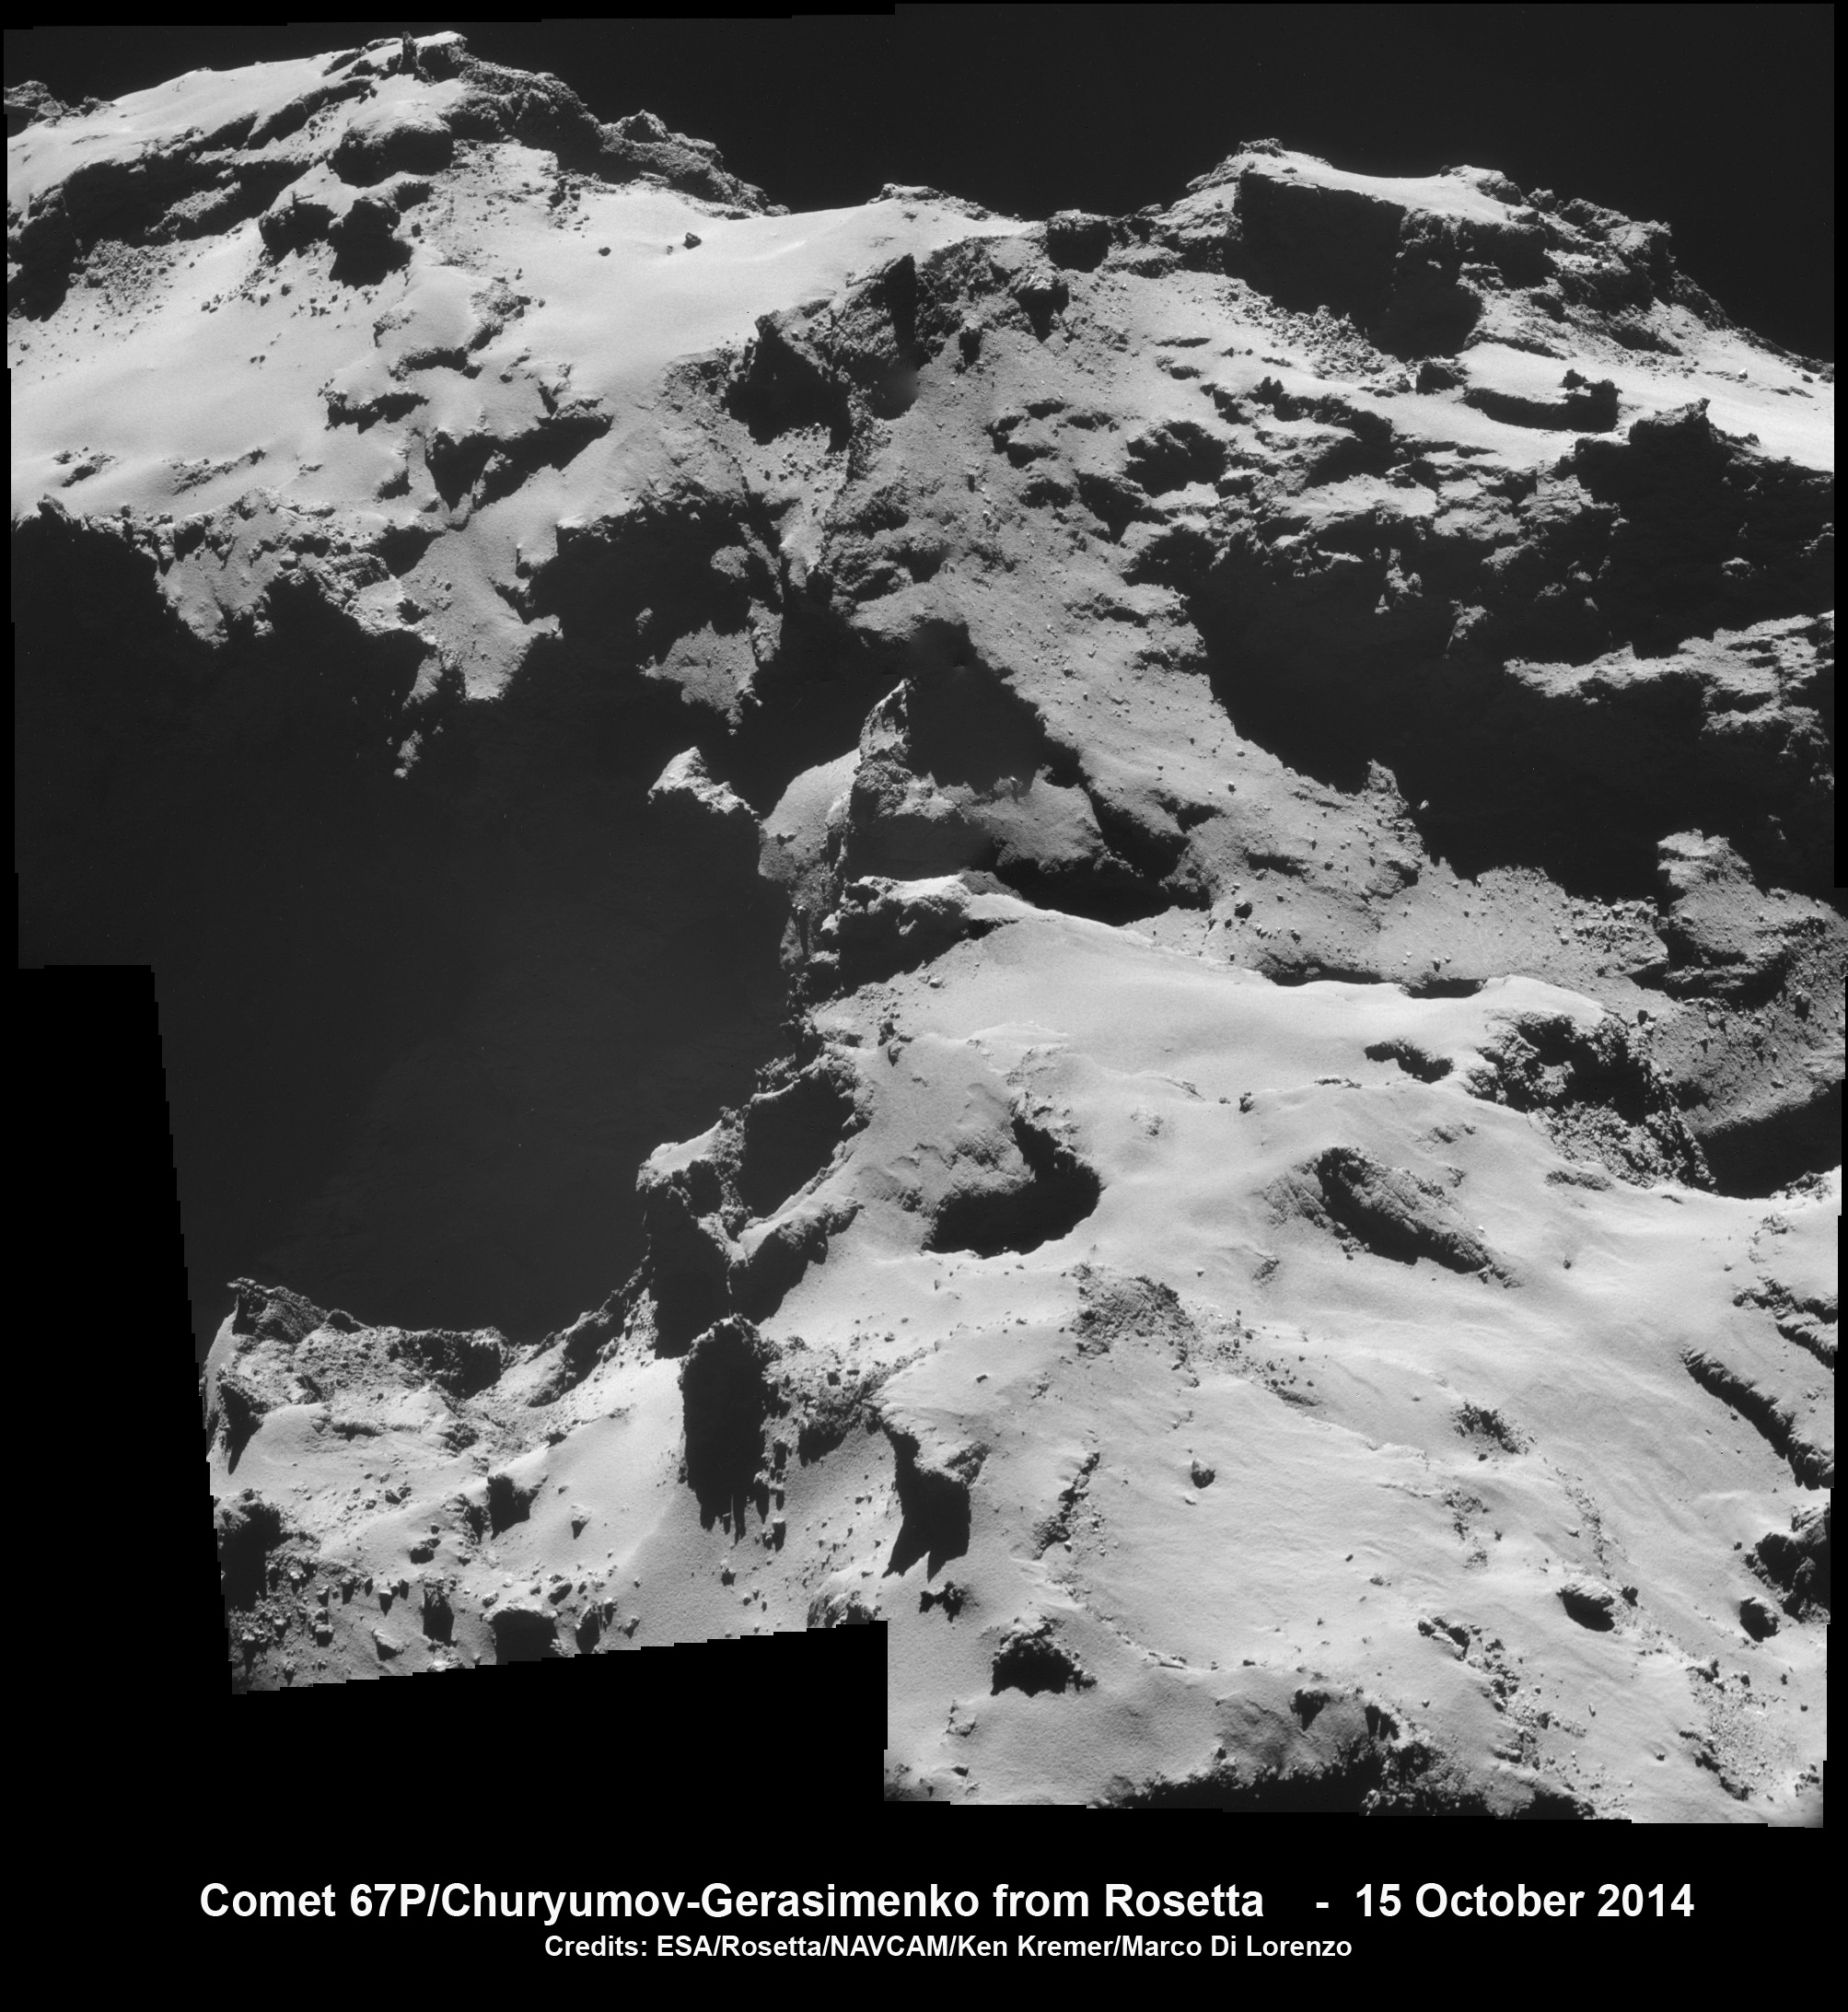 Four-image NAVCAM photo mosaic of Comet 67P/C-G taken on 15 October 2014, from a distance of 9.9 km from the centre of the comet, showing a portion of its ‘head’ lobe.  Credits: ESA/Rosetta/NAVCAM/Ken Kremer -kenkremer.com/Marco Di Lorenzo